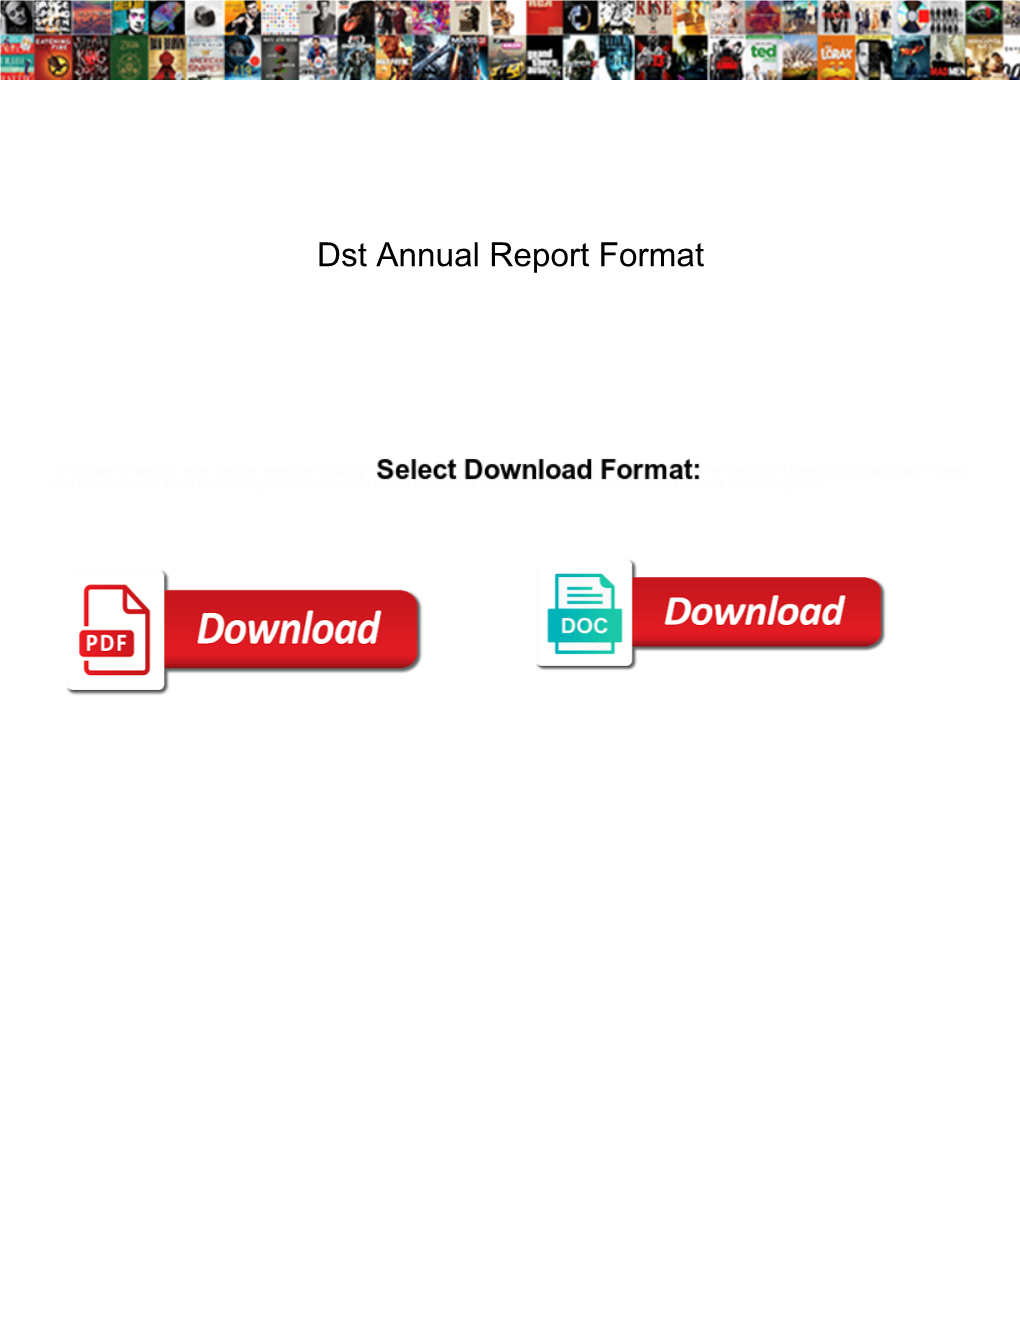 Dst Annual Report Format